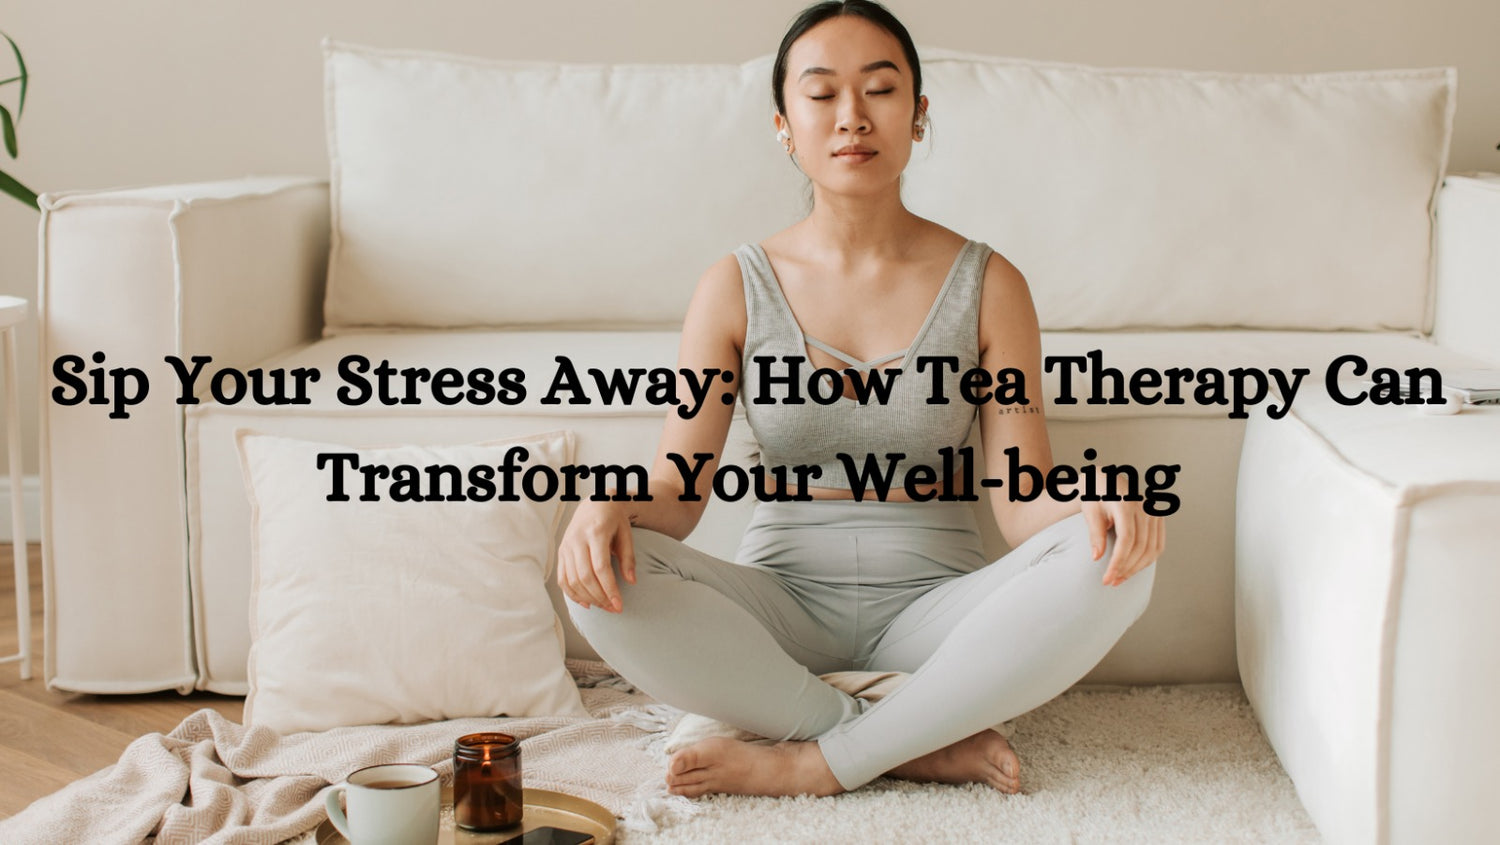 Sip Your Stress Away: How Tea Therapy Can Transform Your Well-being